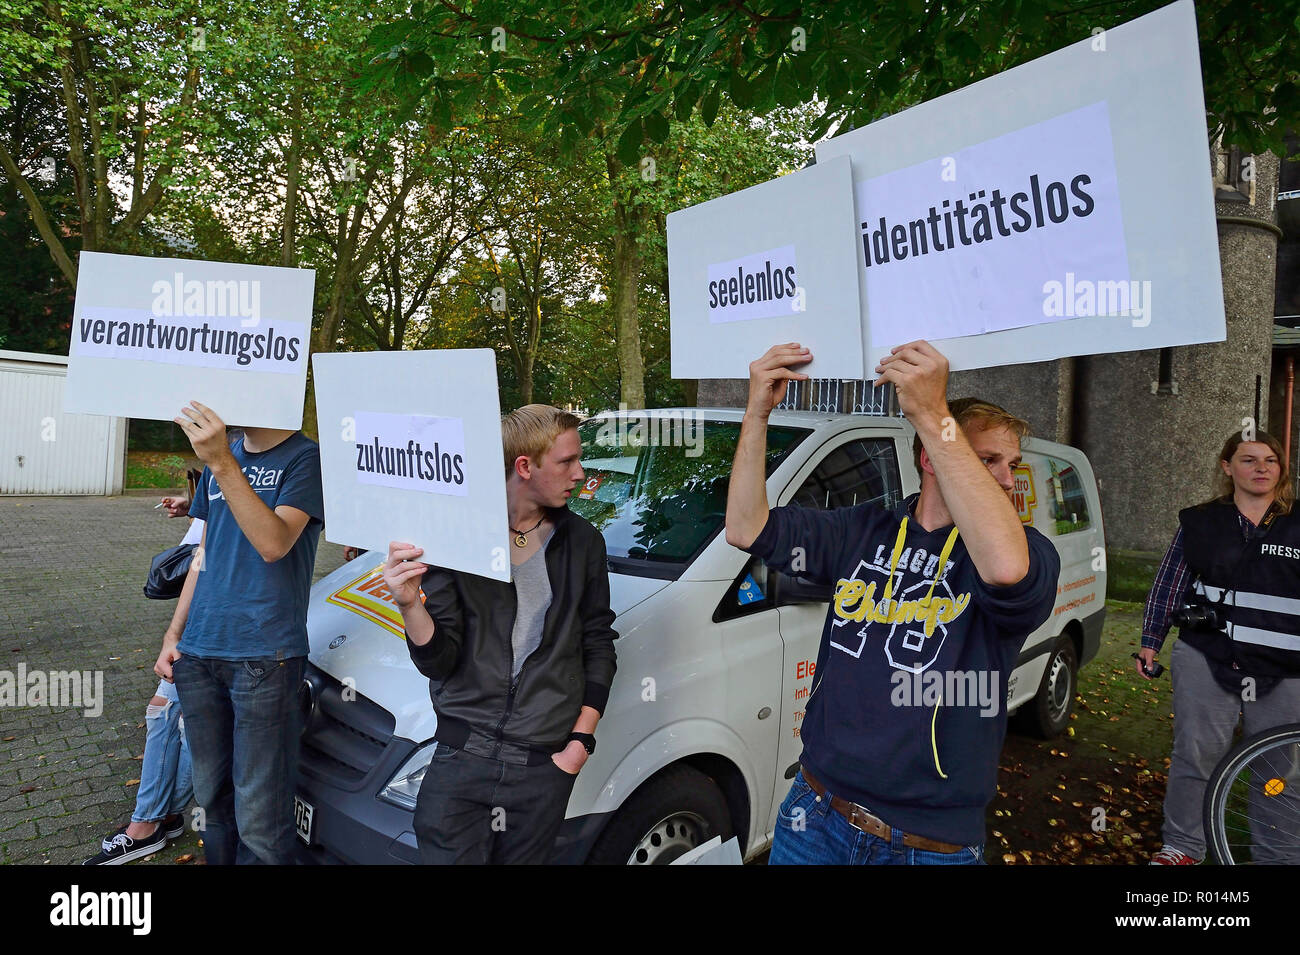 Germany, North Rhine-Westphalia - information event on refugees, including protesting supporters of the Identity Movement Stock Photo